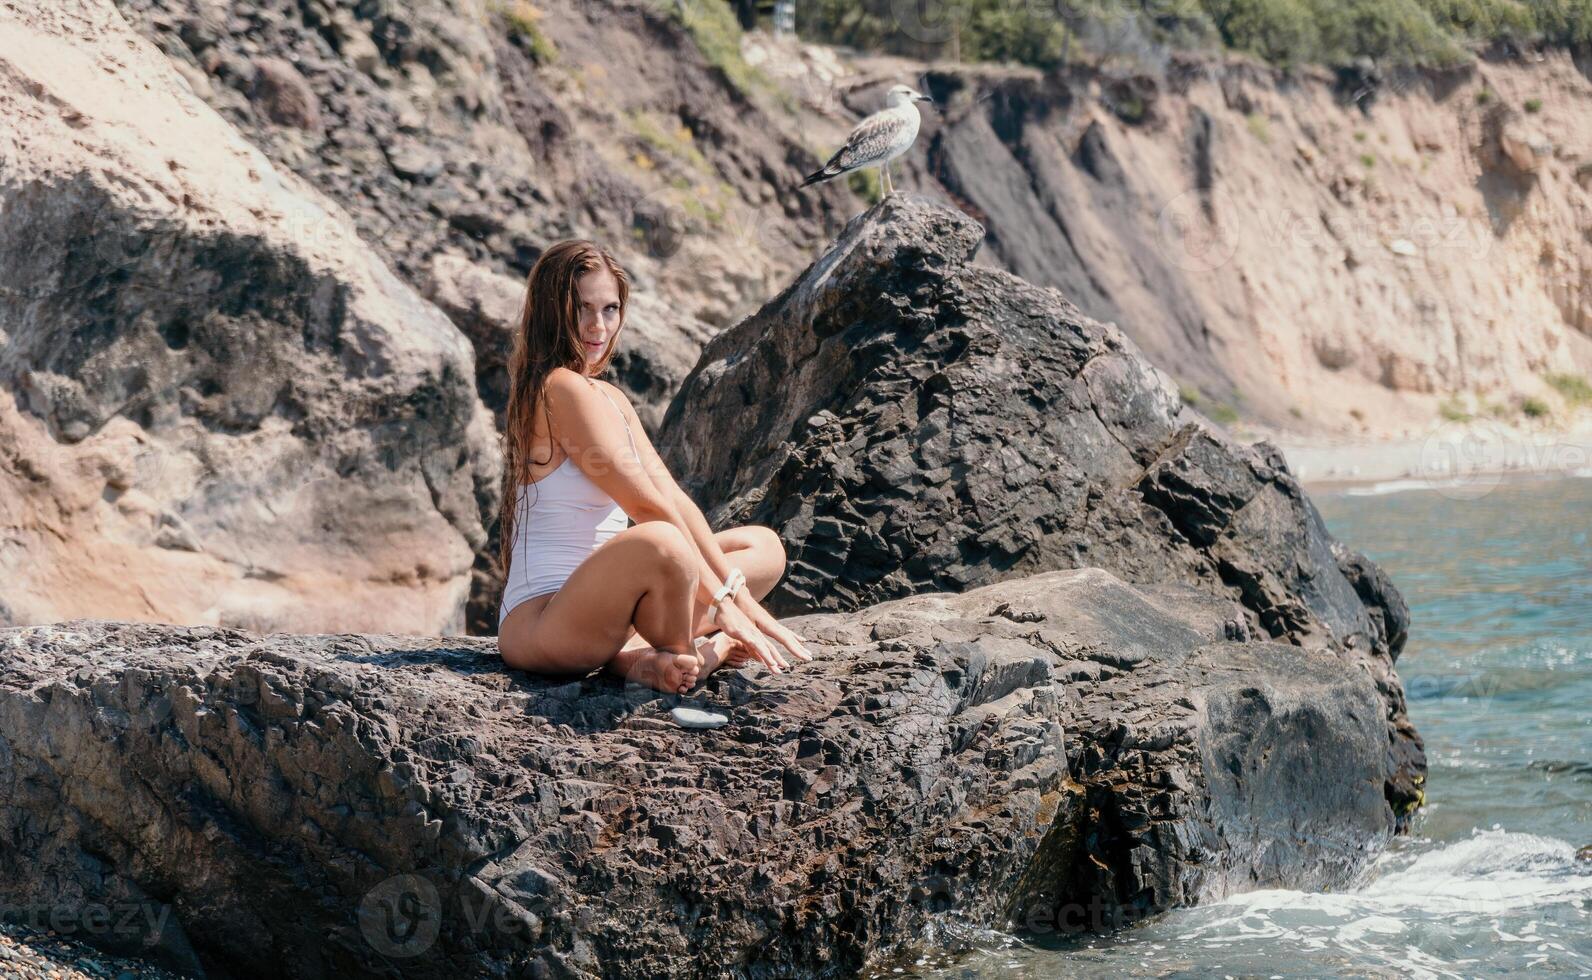 Woman travel sea. Happy tourist in white bikini enjoy taking picture outdoors for memories. Woman traveler posing on the beach at sea surrounded by volcanic mountains, sharing travel adventure journey photo